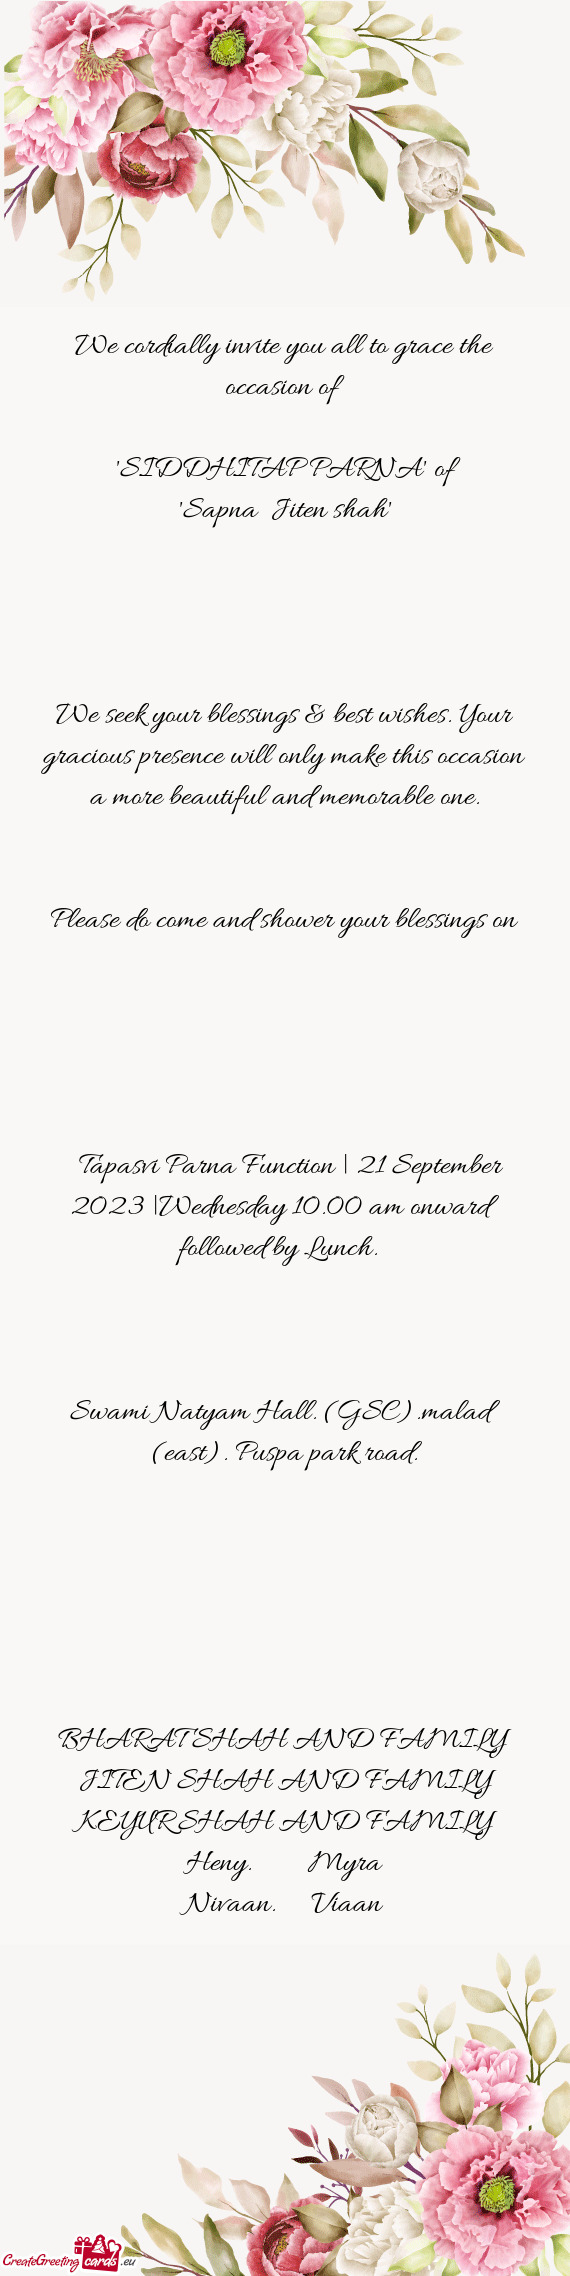 Tapasvi Parna Function | 21 September 2023 |Wednesday 10.00 am onward followed by Lunch